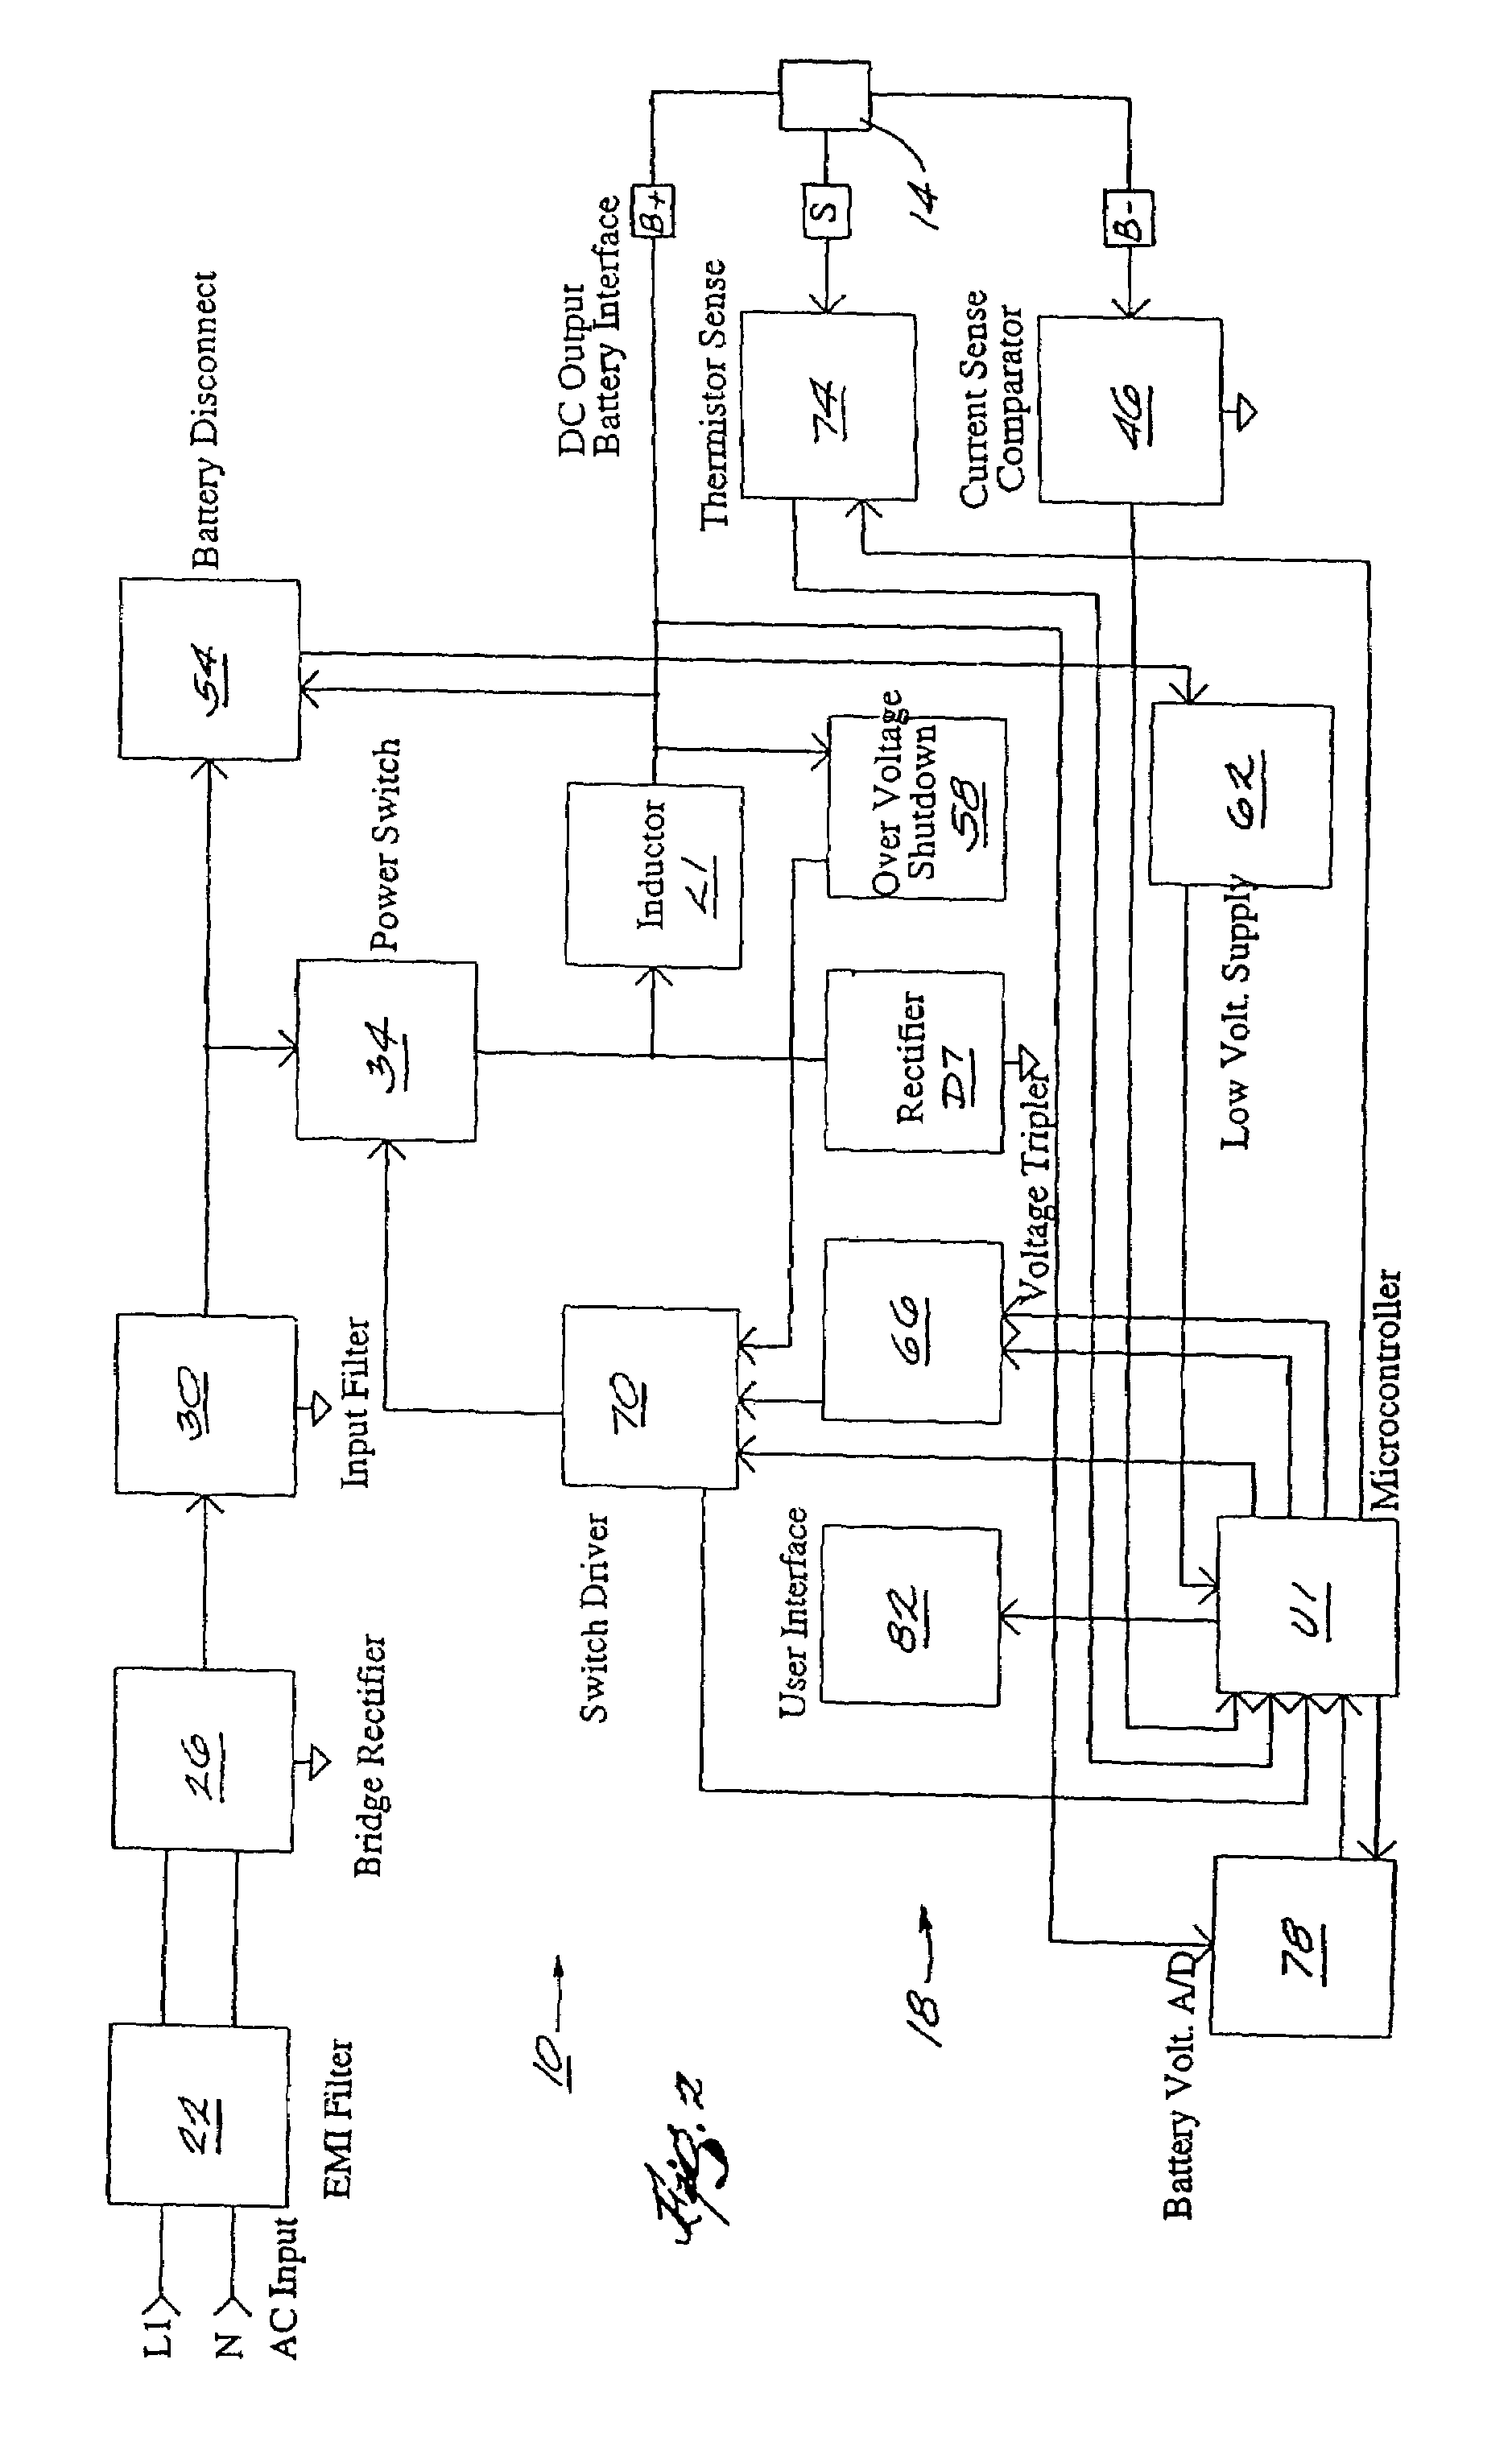 Apparatus and method of activating a microcontroller